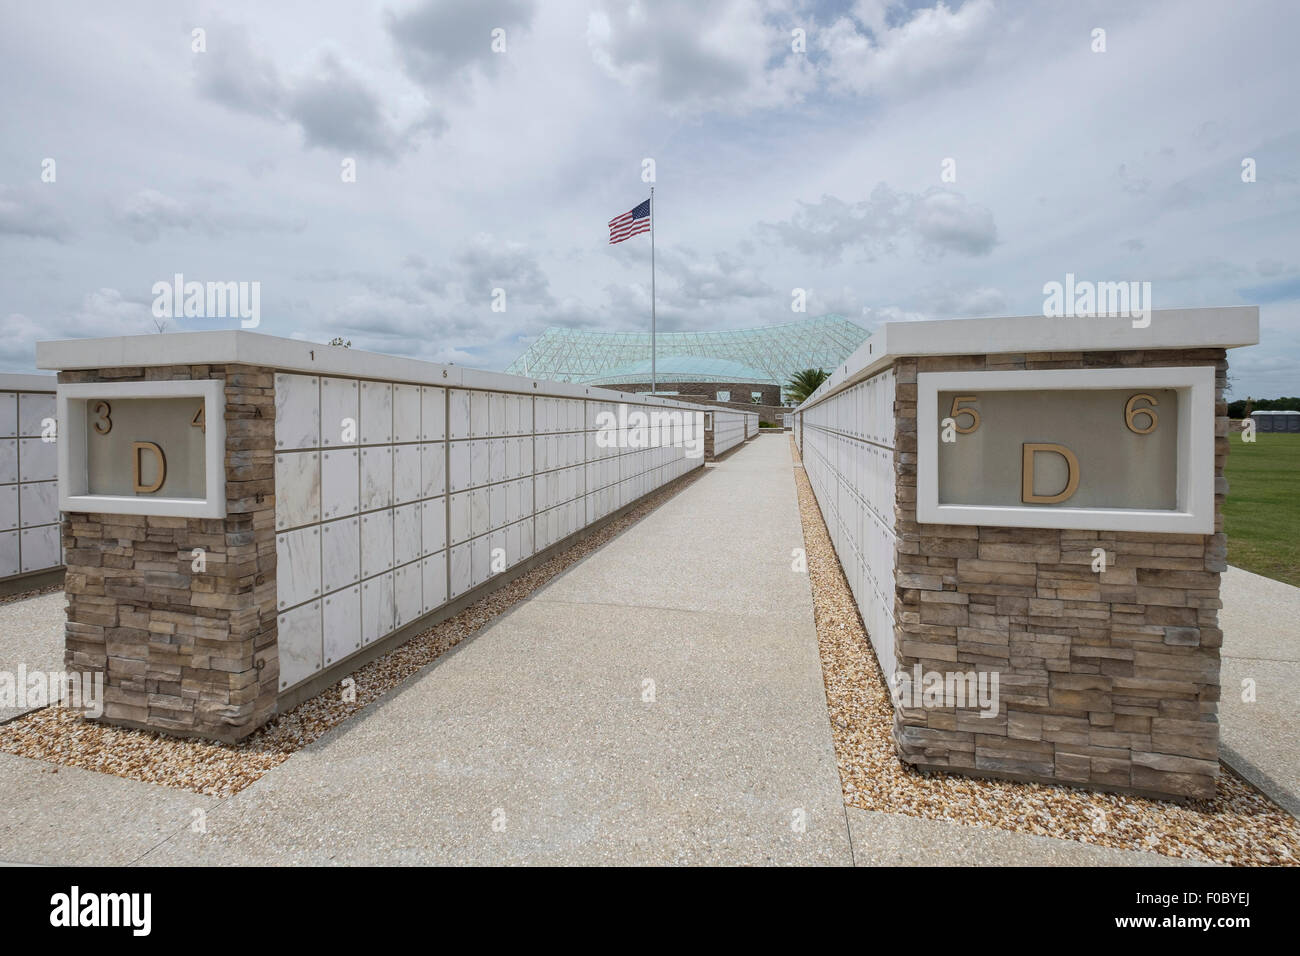 Columbaria At The Sarasota National Cemetery With The Patriot Plaza In The  Background Stock Photo - Alamy